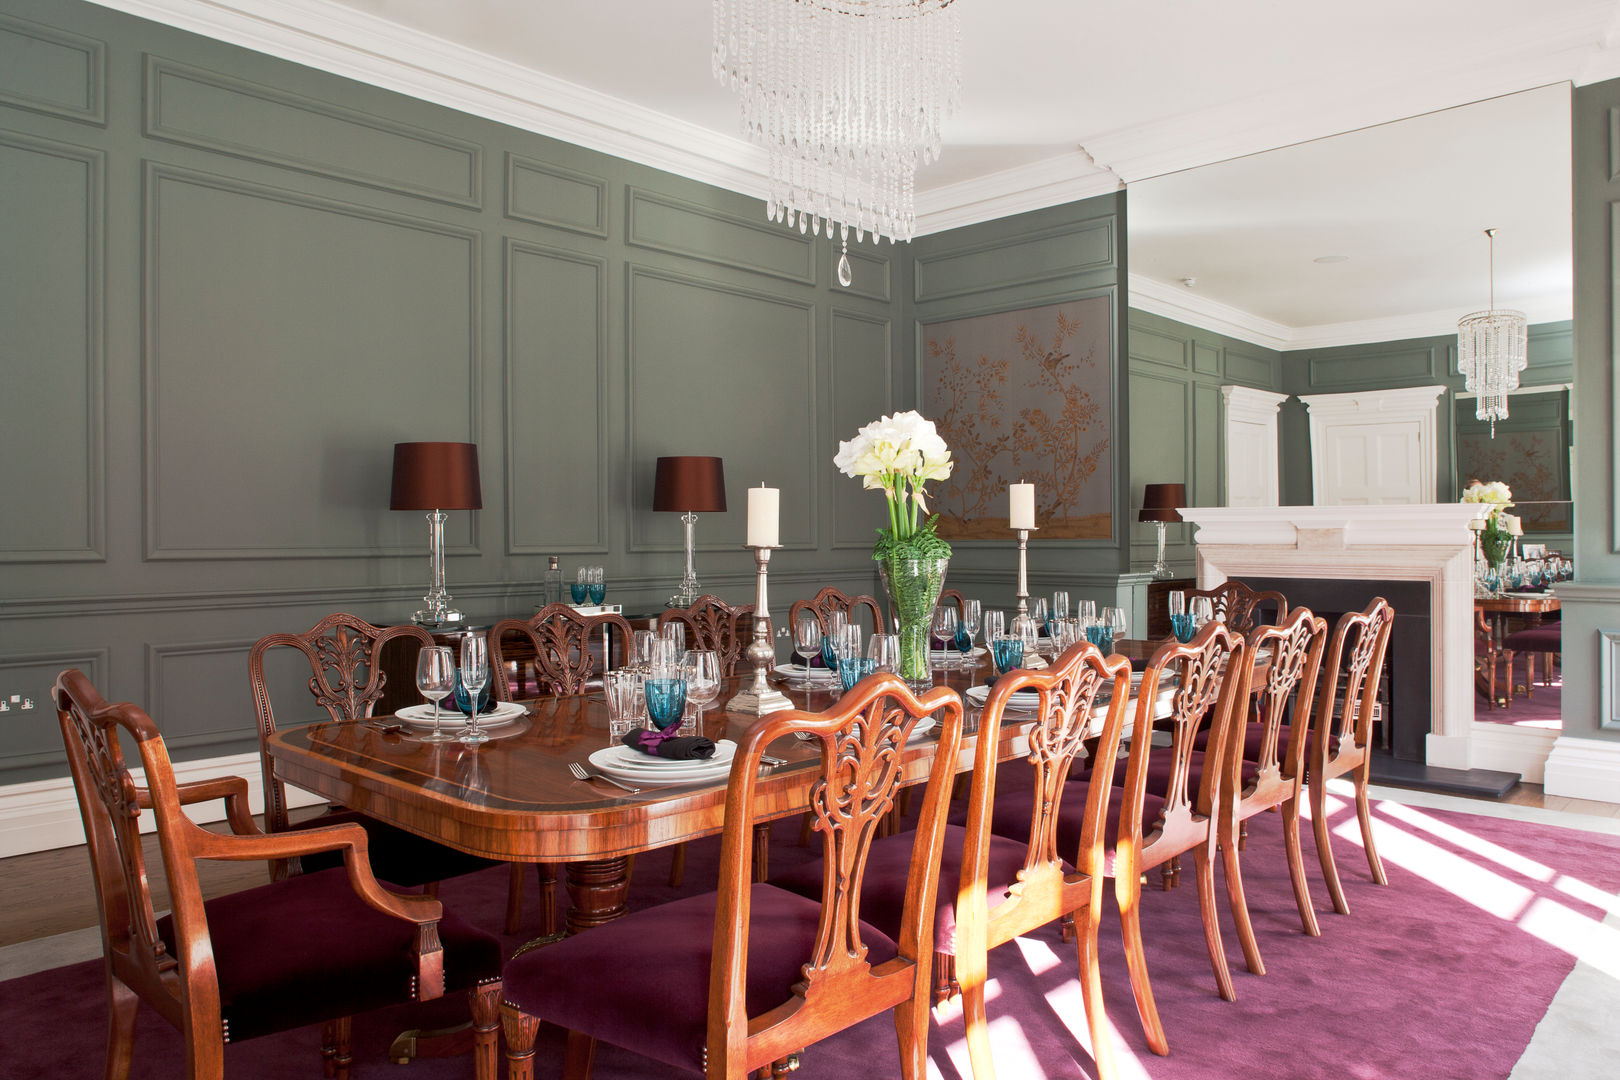 Dining Area Roselind Wilson Design Sala da pranzo moderna dining room,dining table,lamps,wall panelling,flowers,mirror,traditional,interior design